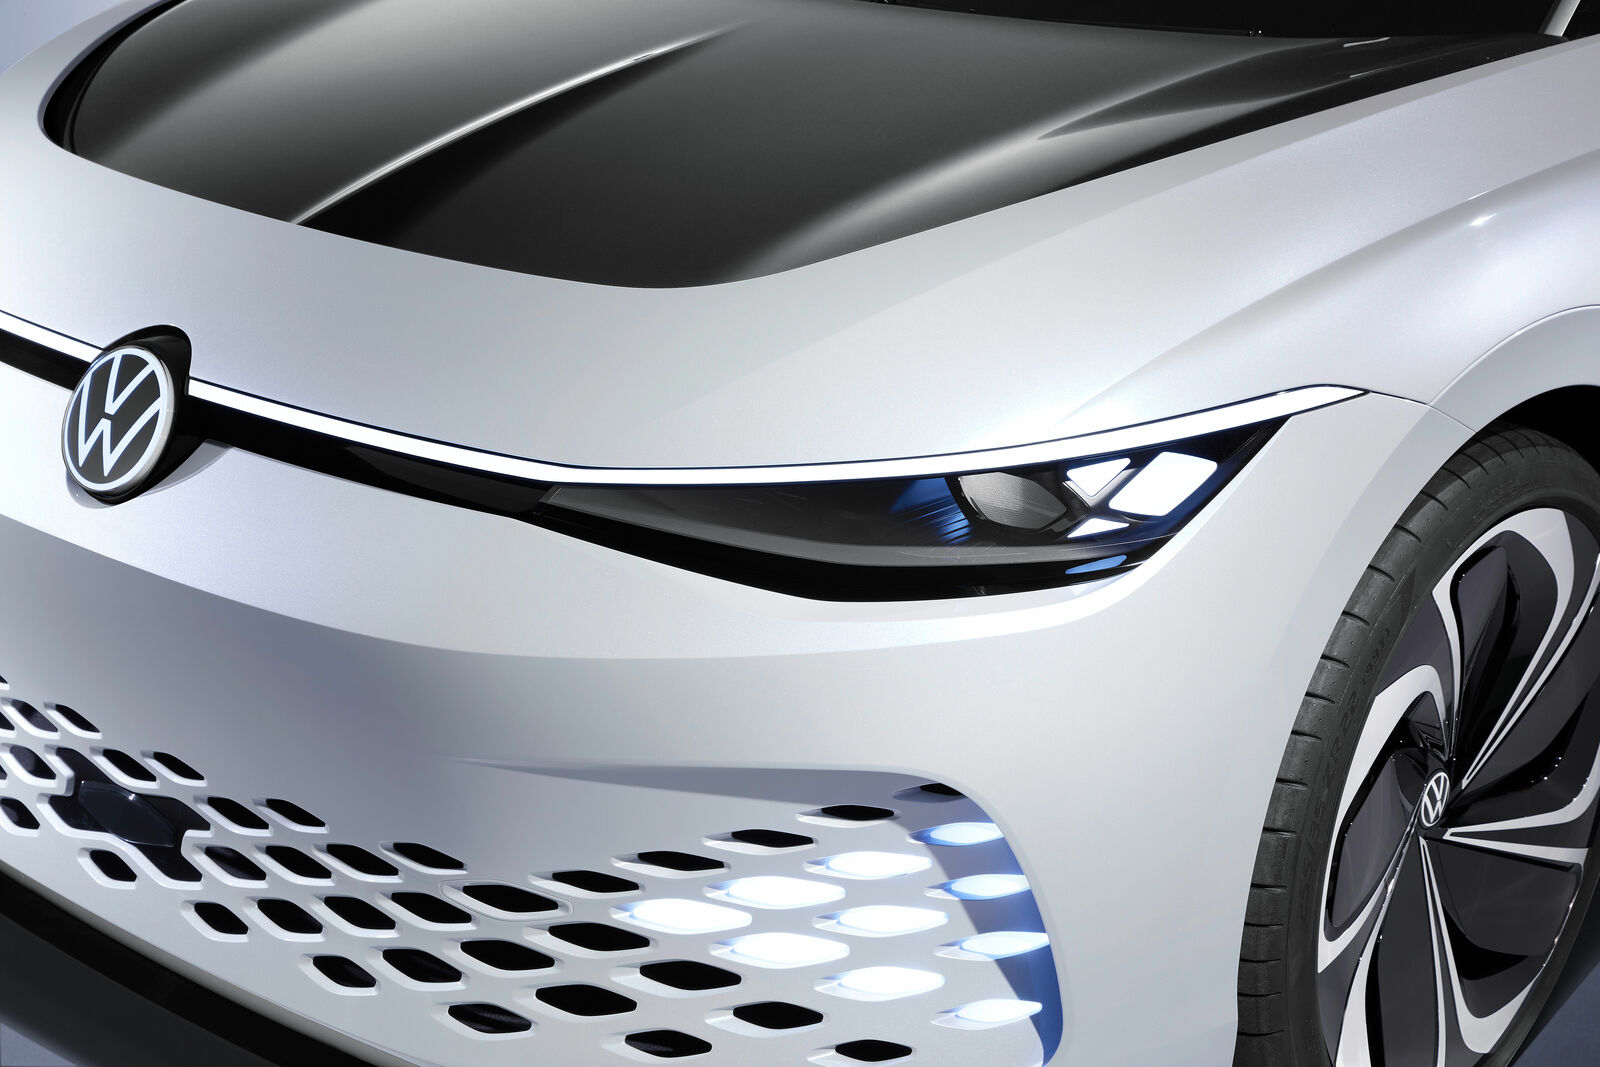 Front spoiler - sporty look and better aerodynamics!